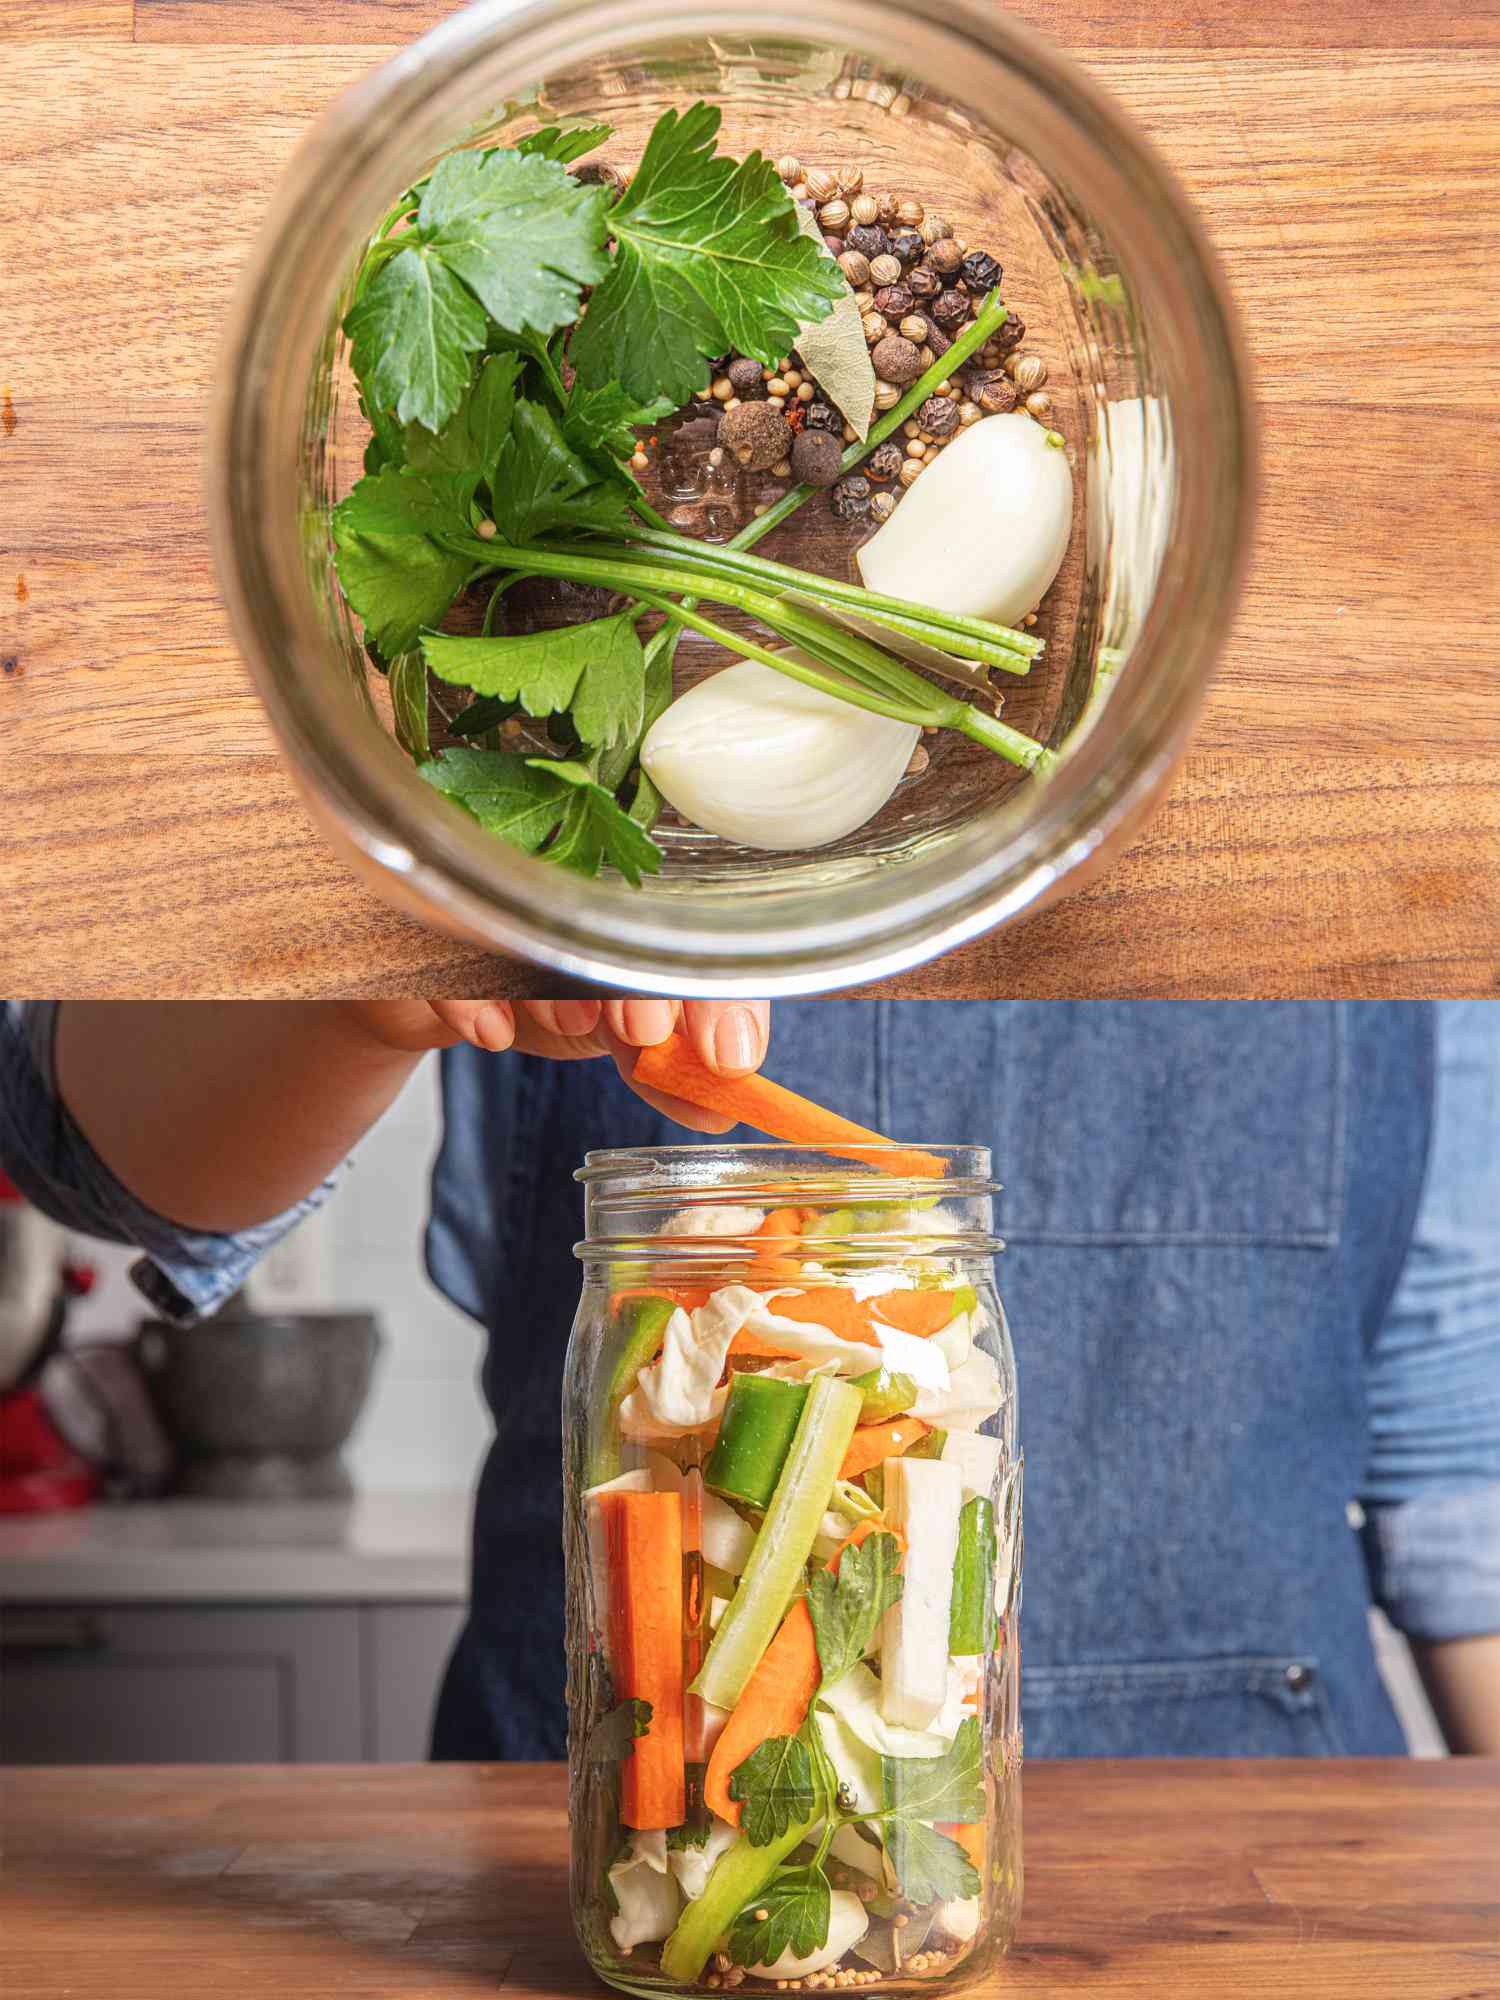 Two image collage of the inside of a jar with pickling spices and a chef adding carrots to jar